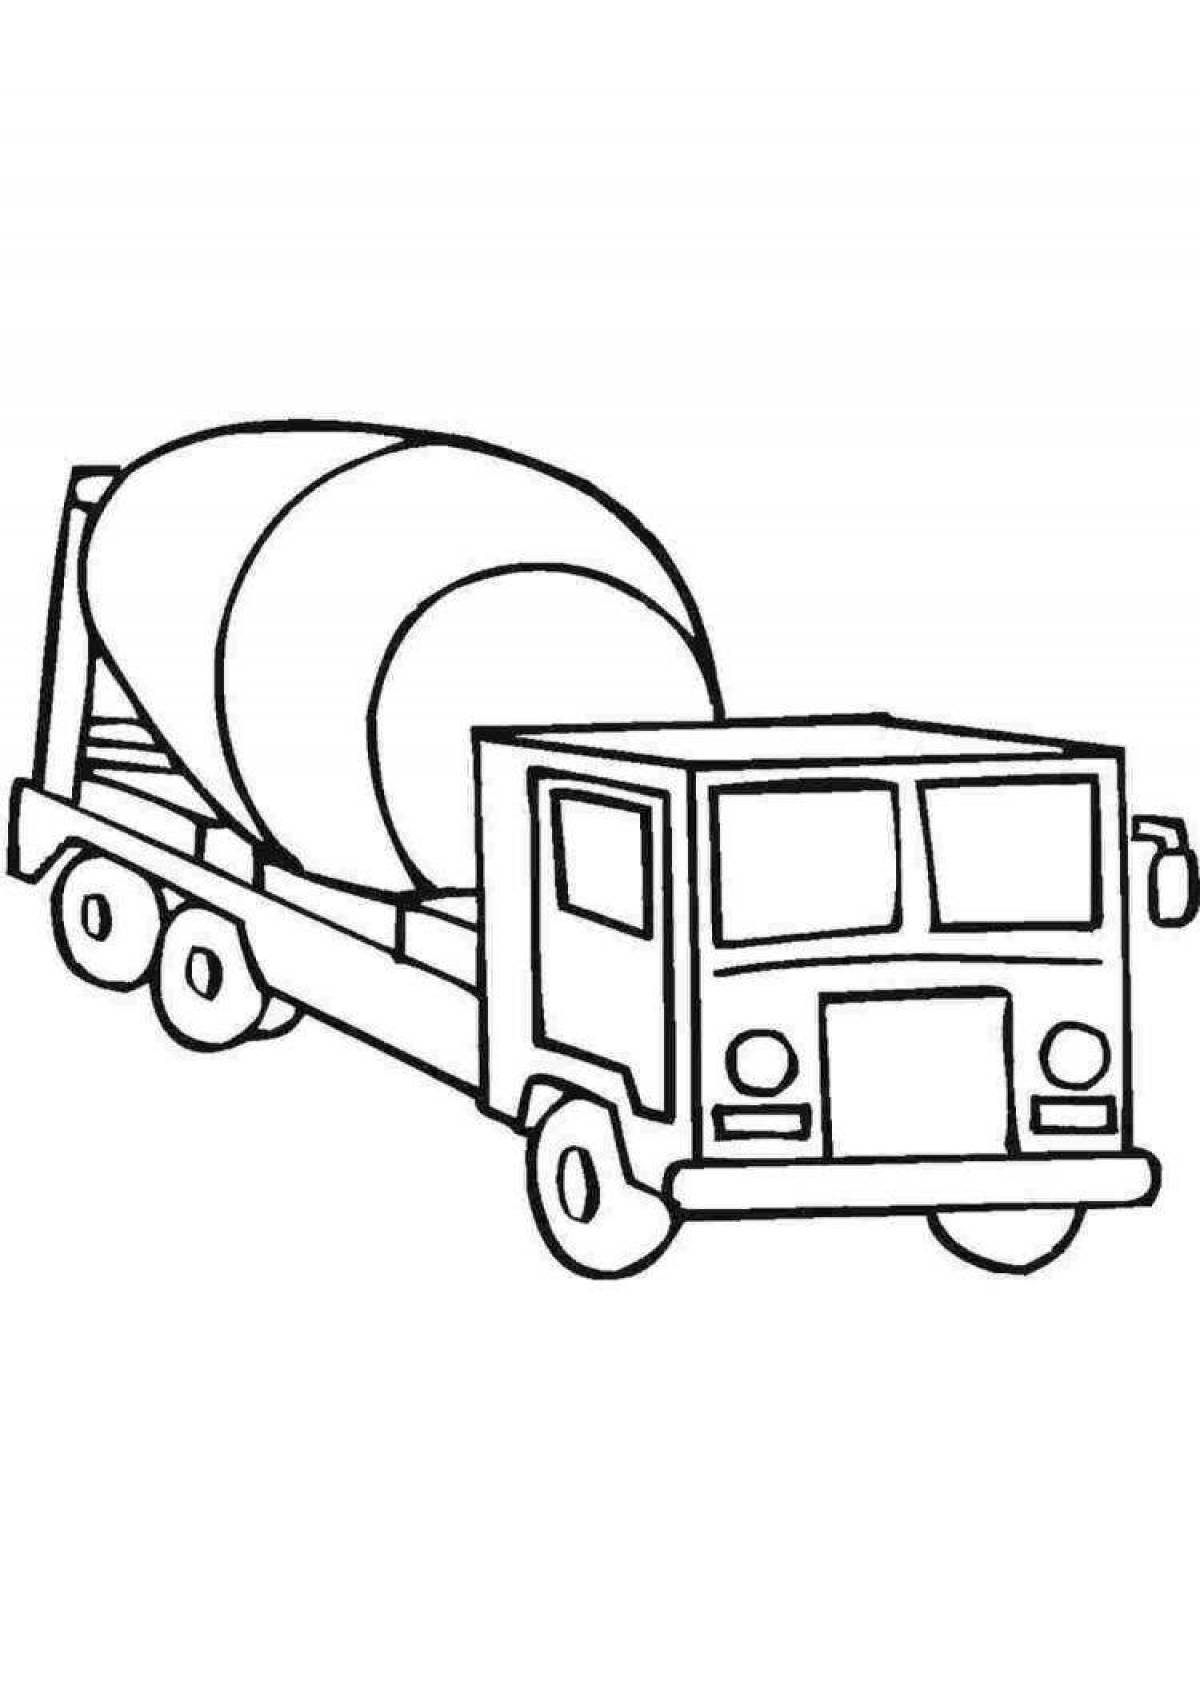 Attractive sewer car coloring page